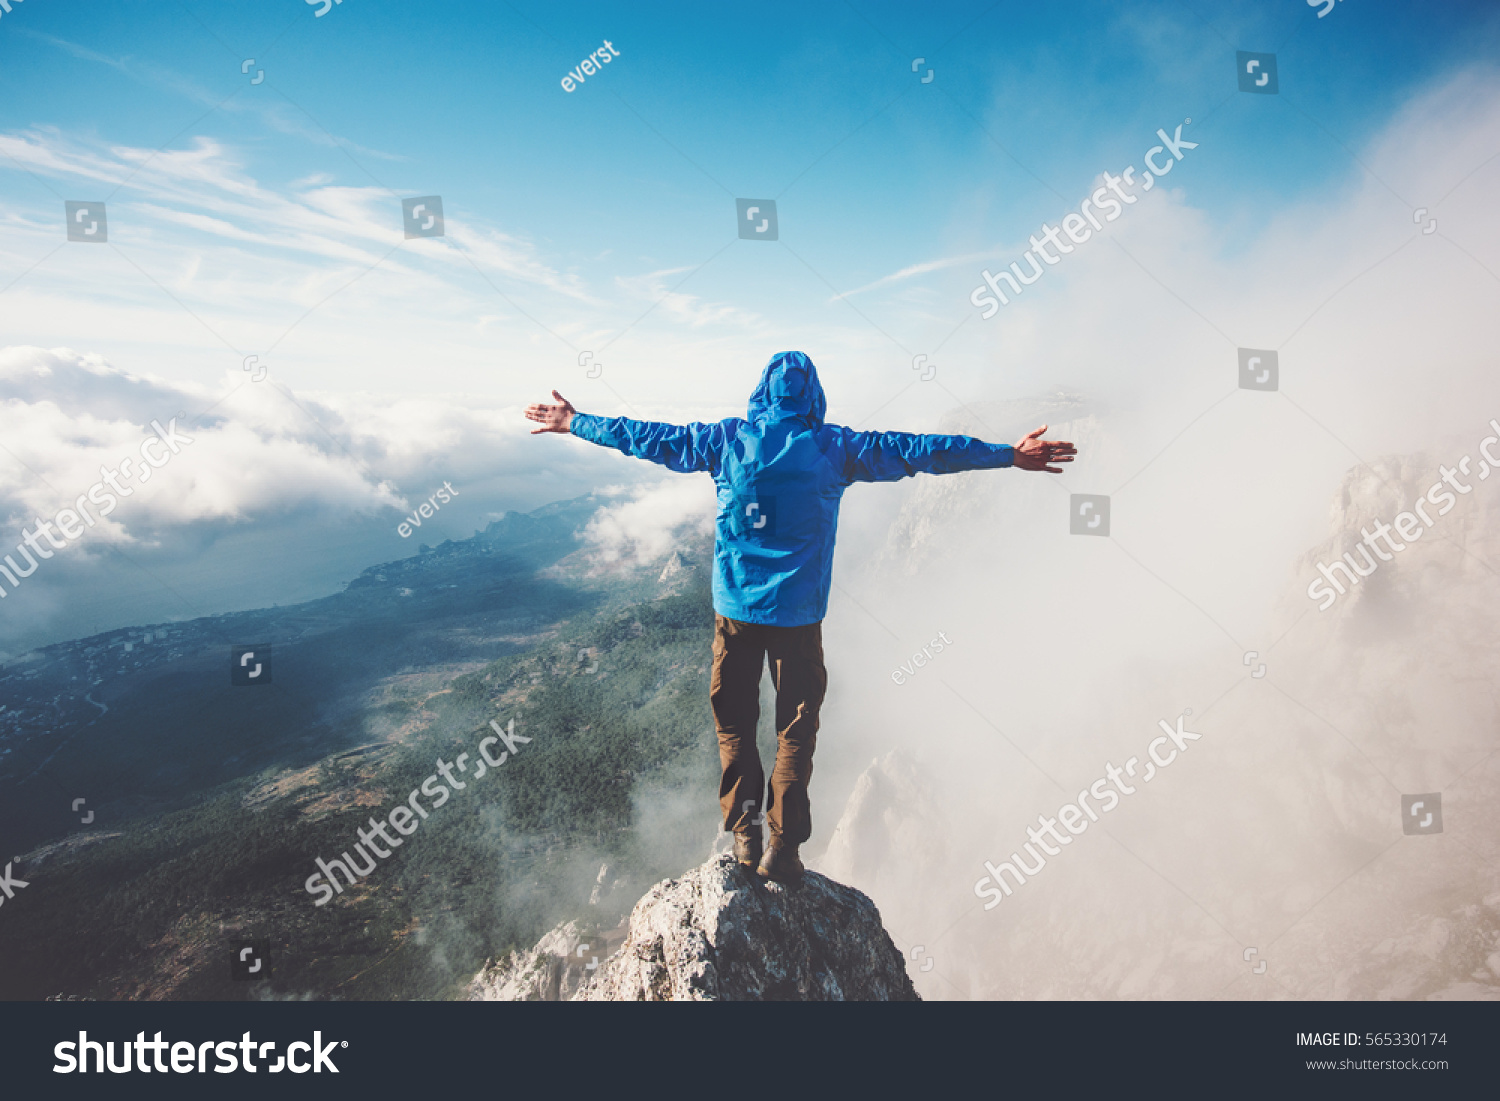 Happy Man on mountain summit enjoying aerial view hands raised over clouds Travel Lifestyle success concept adventure active vacations outdoor freedom emotions #565330174